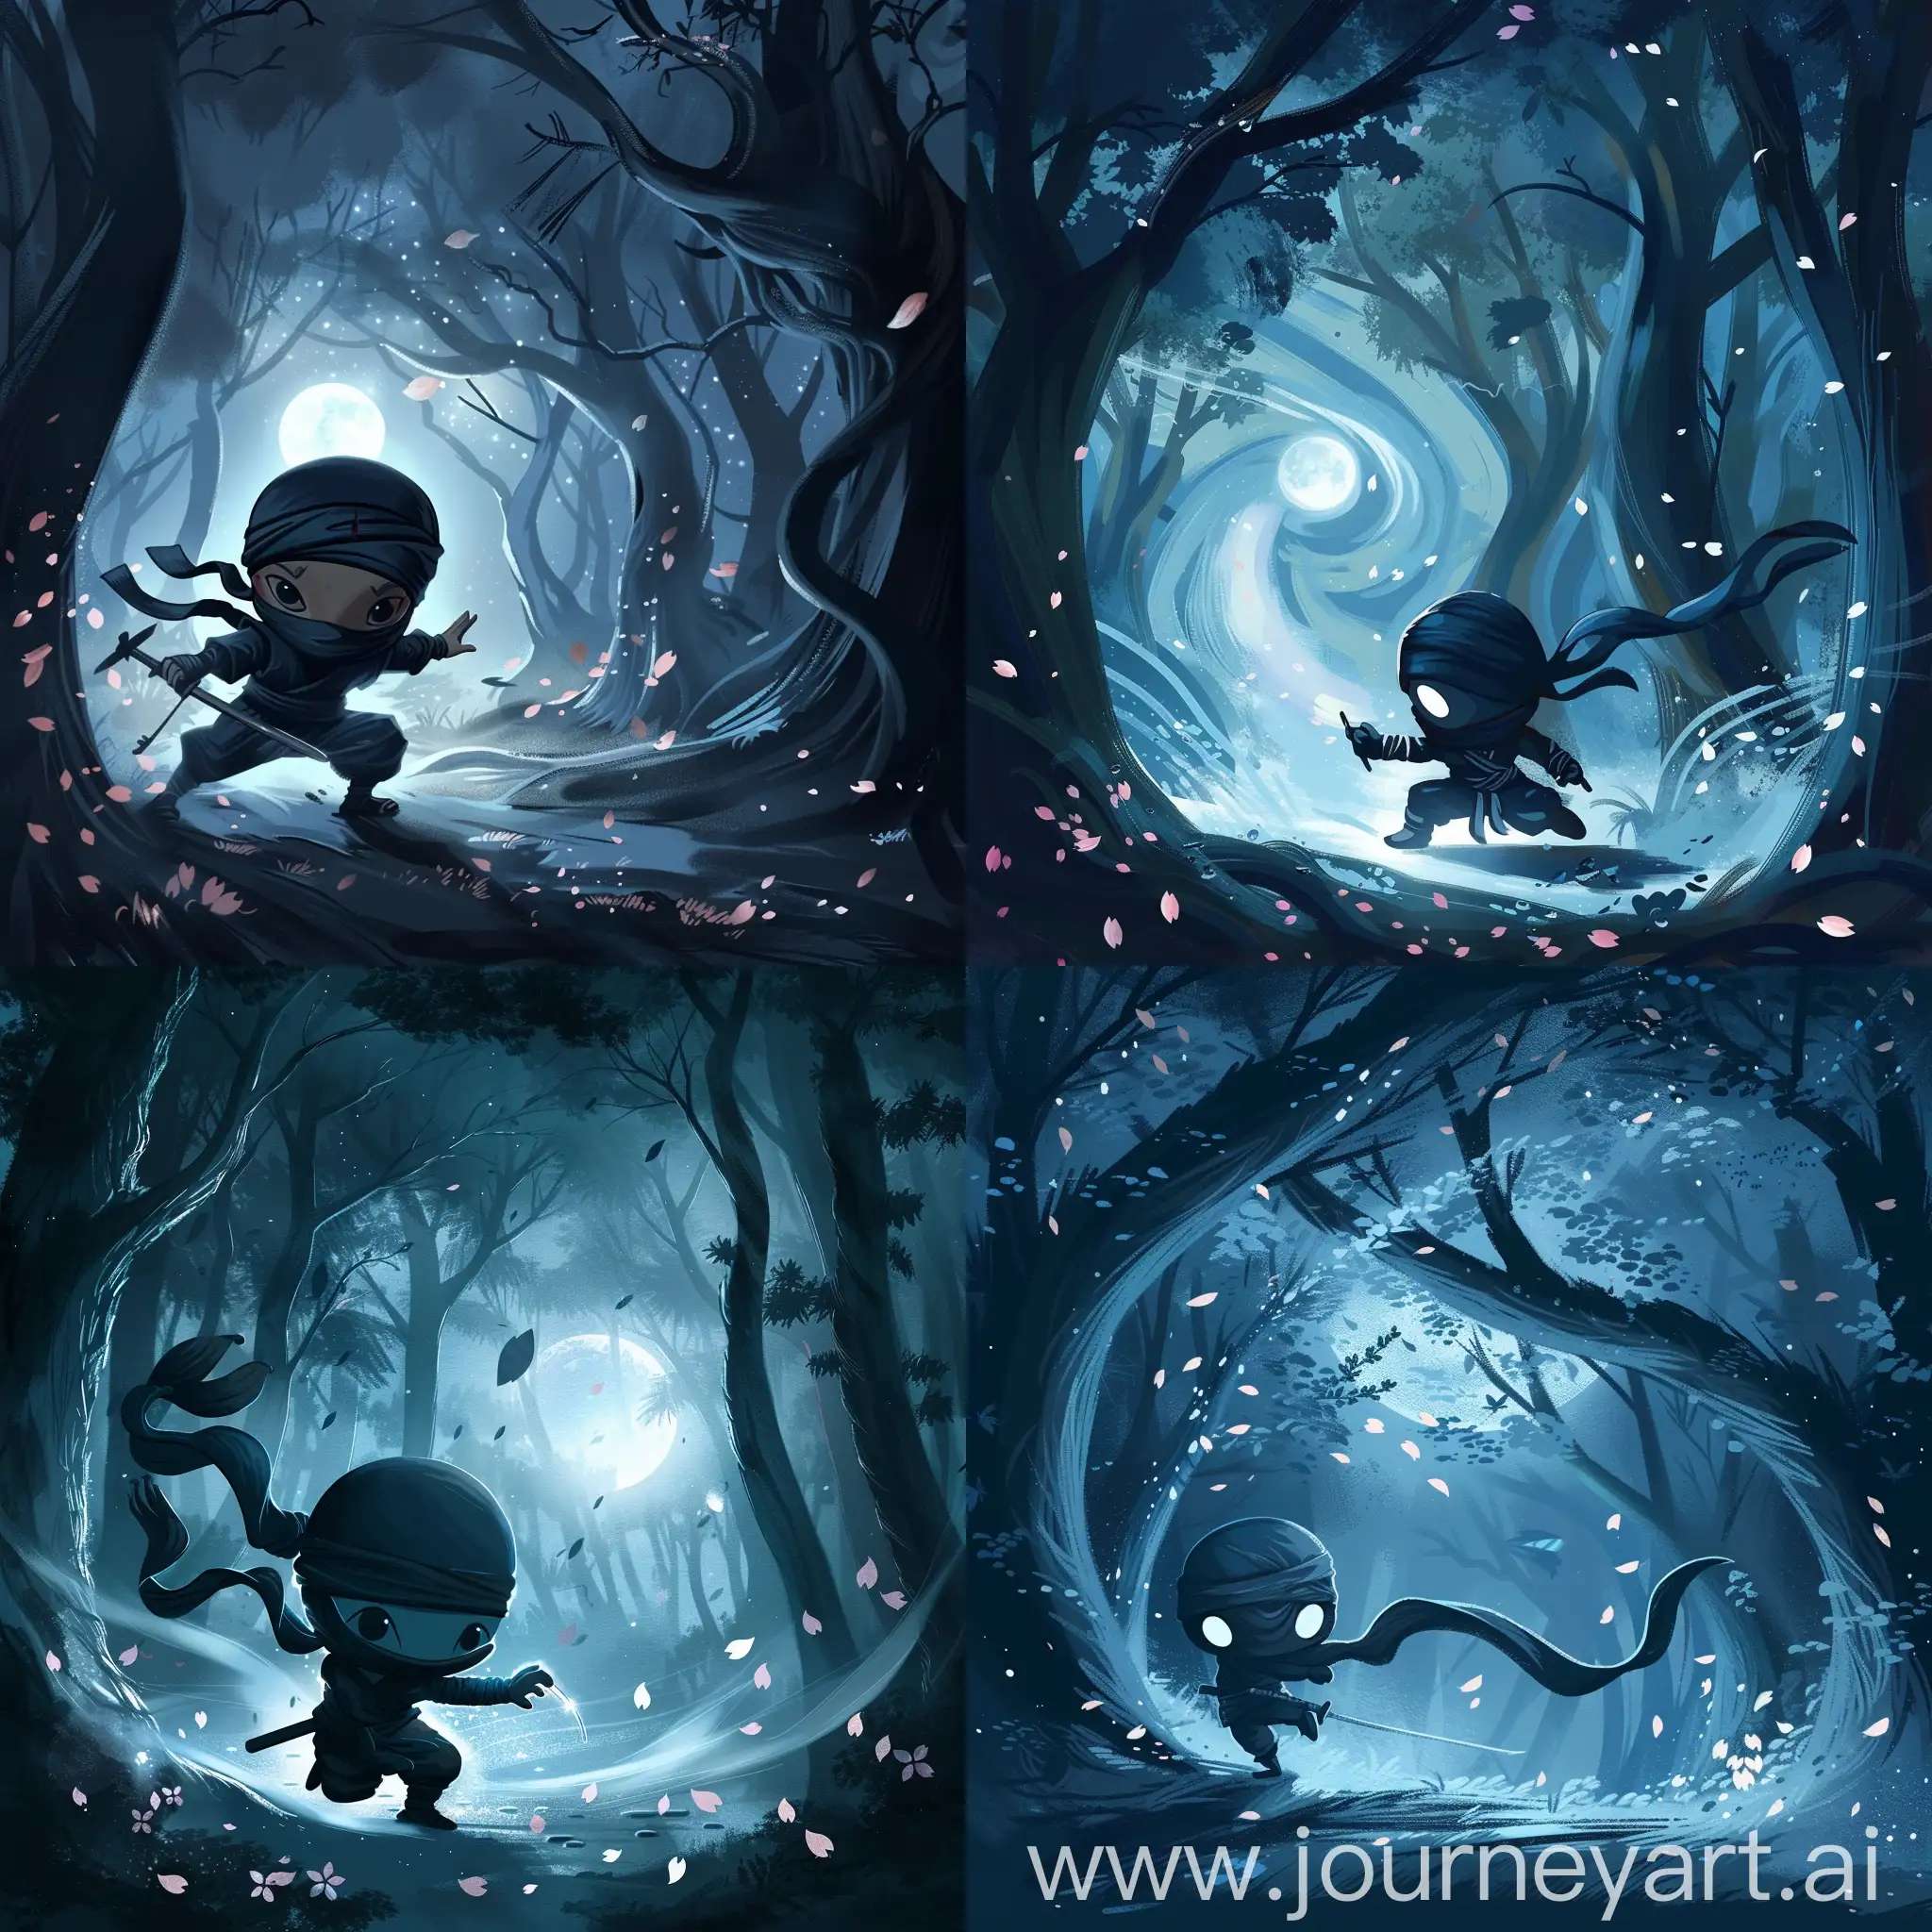 Imagine a moonlit night in a mystical forest where the shadows dance with secrets. The ninja chibi, agile and swift, emerges from the darkness, poised for action. With a shuriken in hand and determination in their eyes, they navigate through the enchanted woods, their presence barely a whisper. Yet, in their silent steps lies a powerful message – the indomitable spirit of resilience and courage.

Design Elements:

Position the ninja chibi in a dynamic stance, perhaps crouching with one hand extended, ready to throw a shuriken.
Surround the ninja with swirling shadows and ethereal moonlight filtering through the trees, creating an atmosphere of mystery and intrigue.
Incorporate subtle details like cherry blossom petals or falling leaves to add depth and movement to the design.
Use a color palette dominated by shades of blue and black for the night sky and shadows, with pops of silver or white for the moonlight highlights.